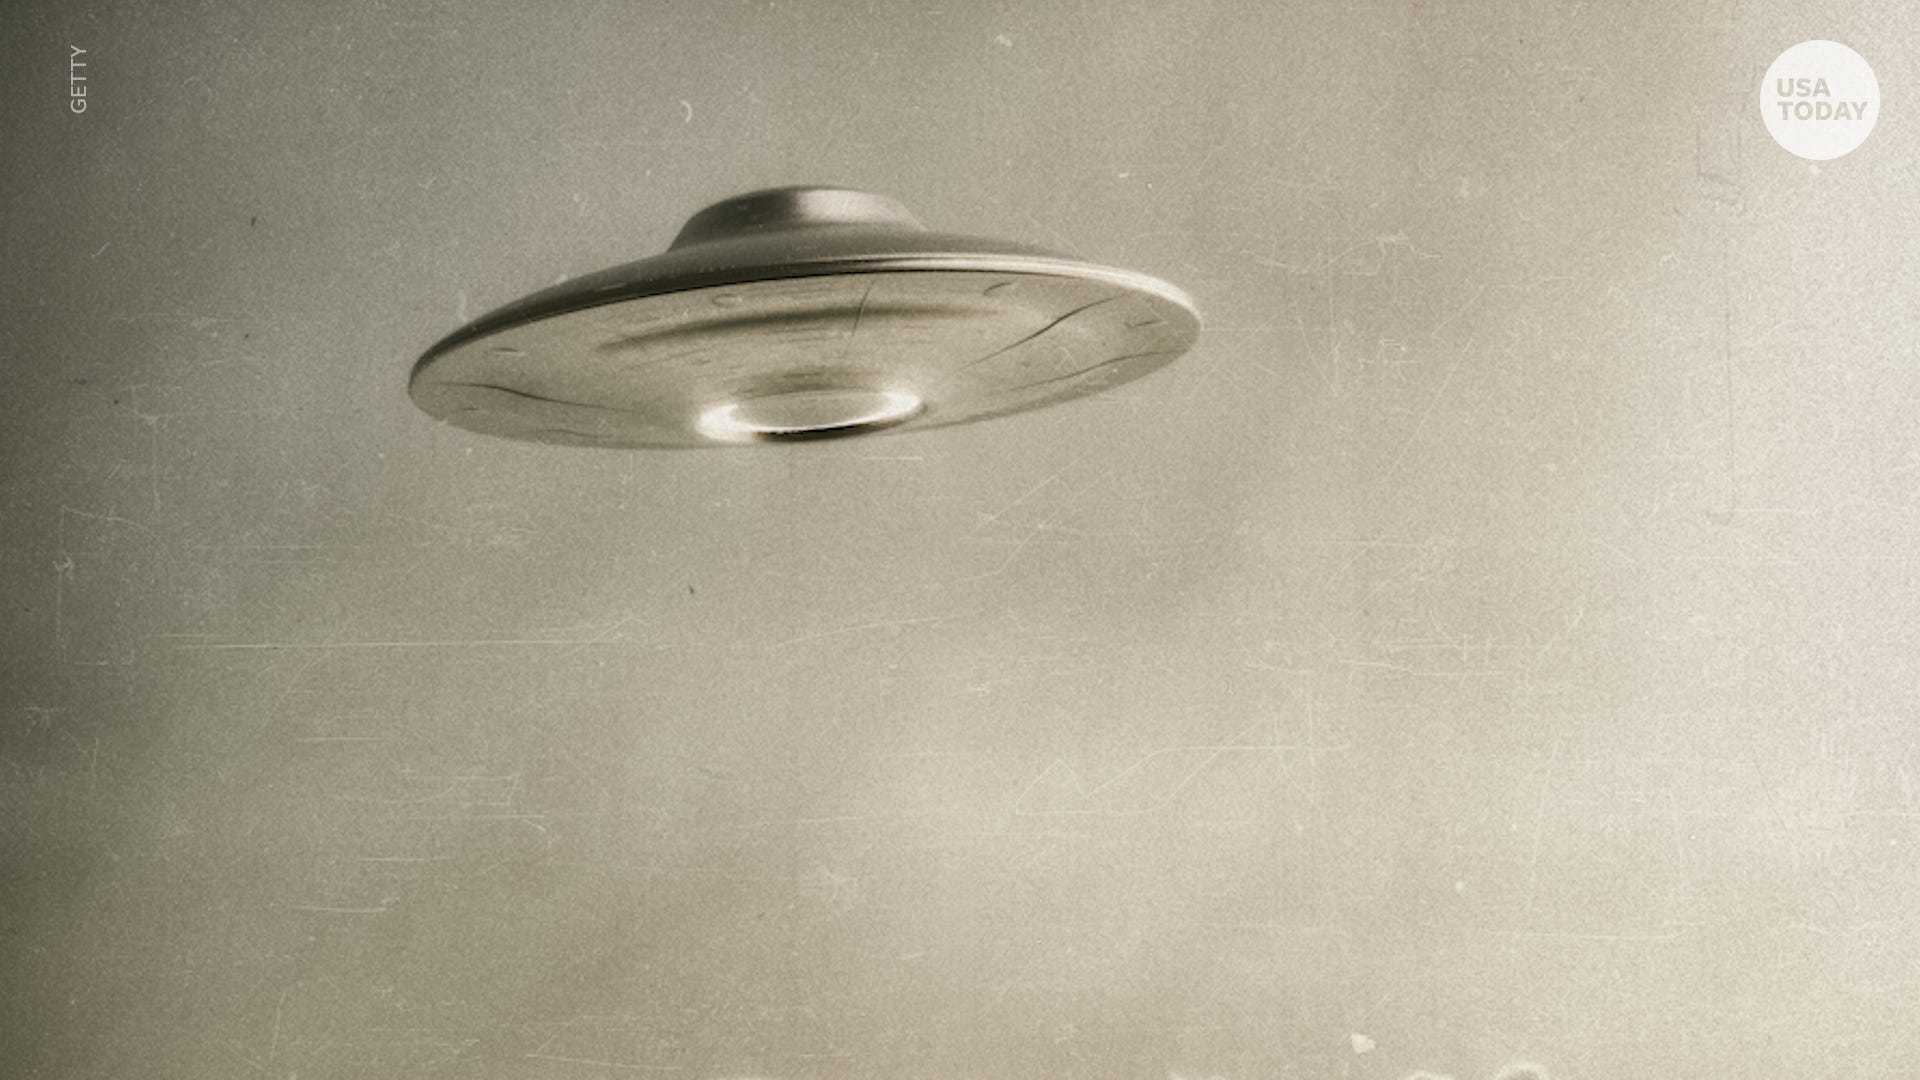 New Mexico UFO sightings ranked 5th in the nation, report finds